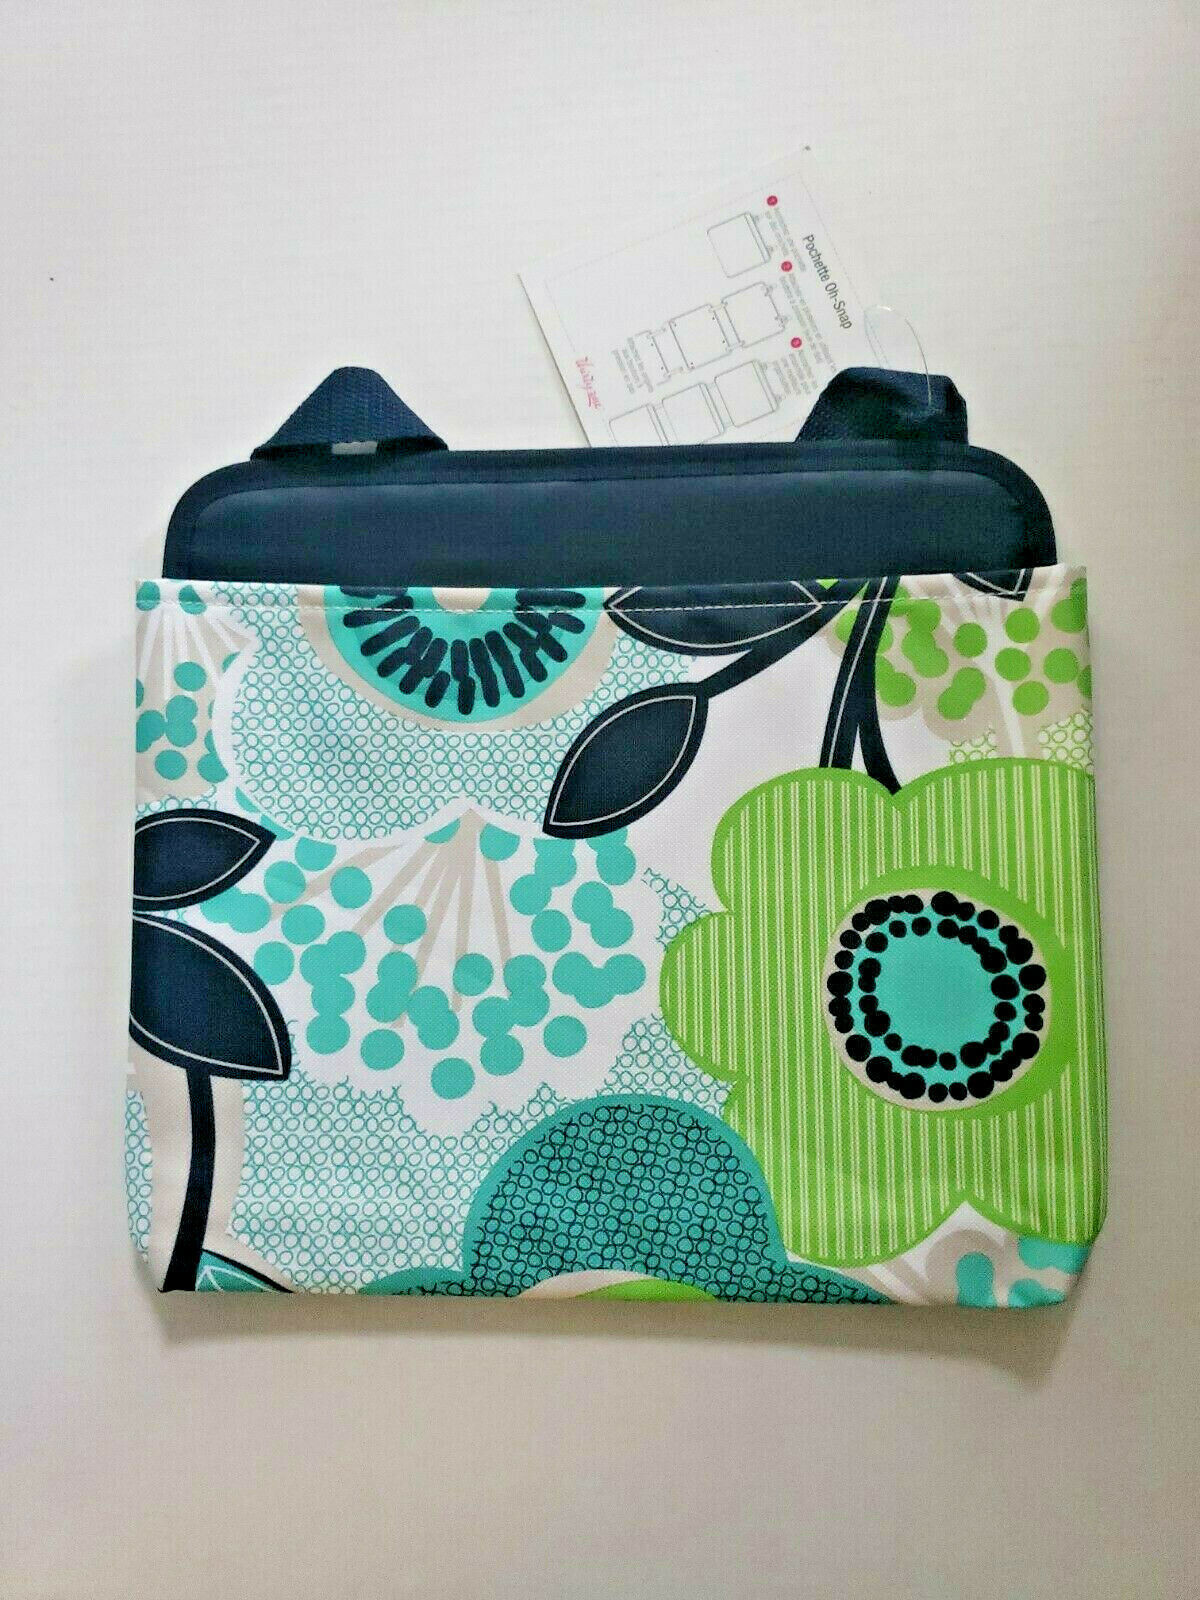 Thirty One Retired OH SNAP POCKET in FABULOUS FLORAL navy, green, teal SKU U11 - $24.99